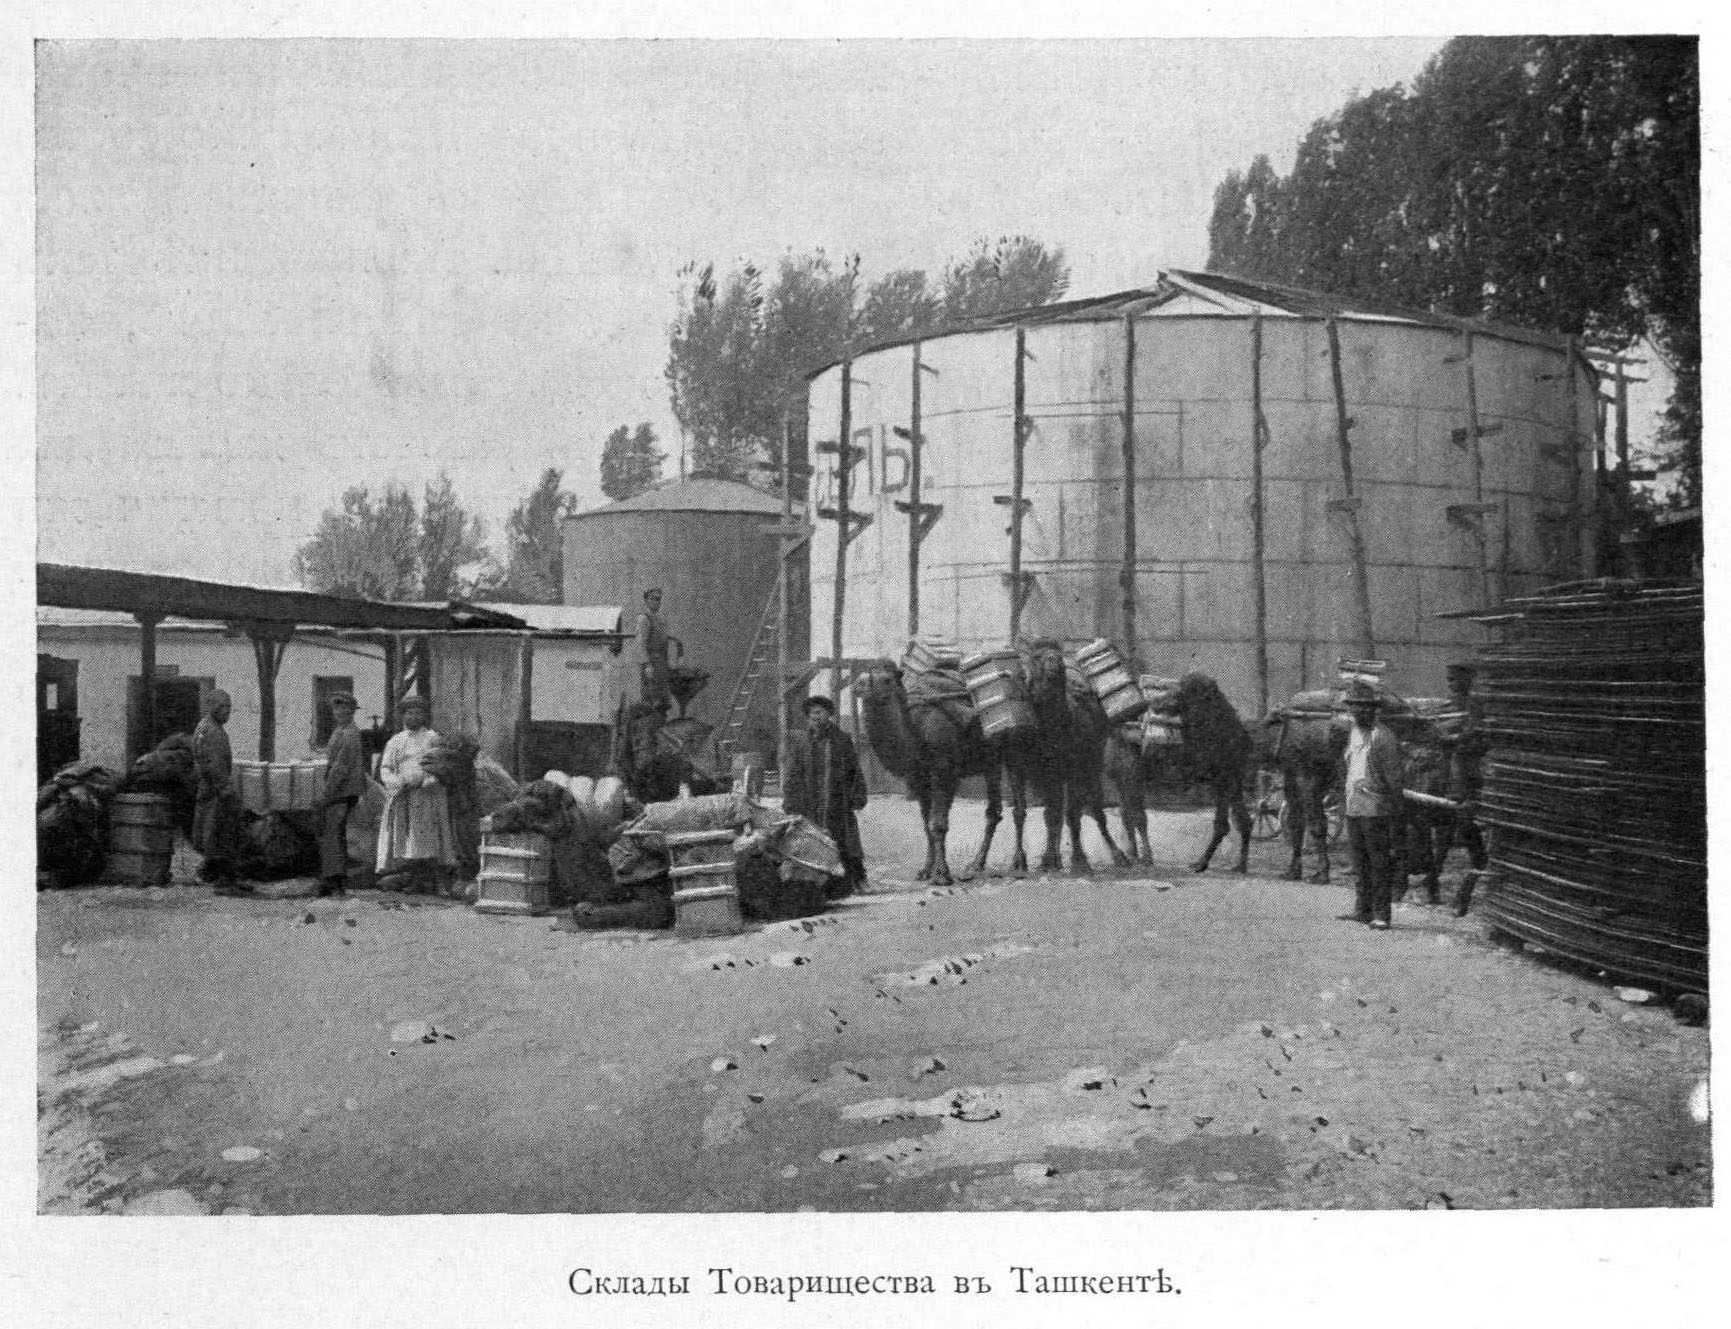 Camels are an ancient means of transport in Asia by the oil and paraffin depot in Tashkent.